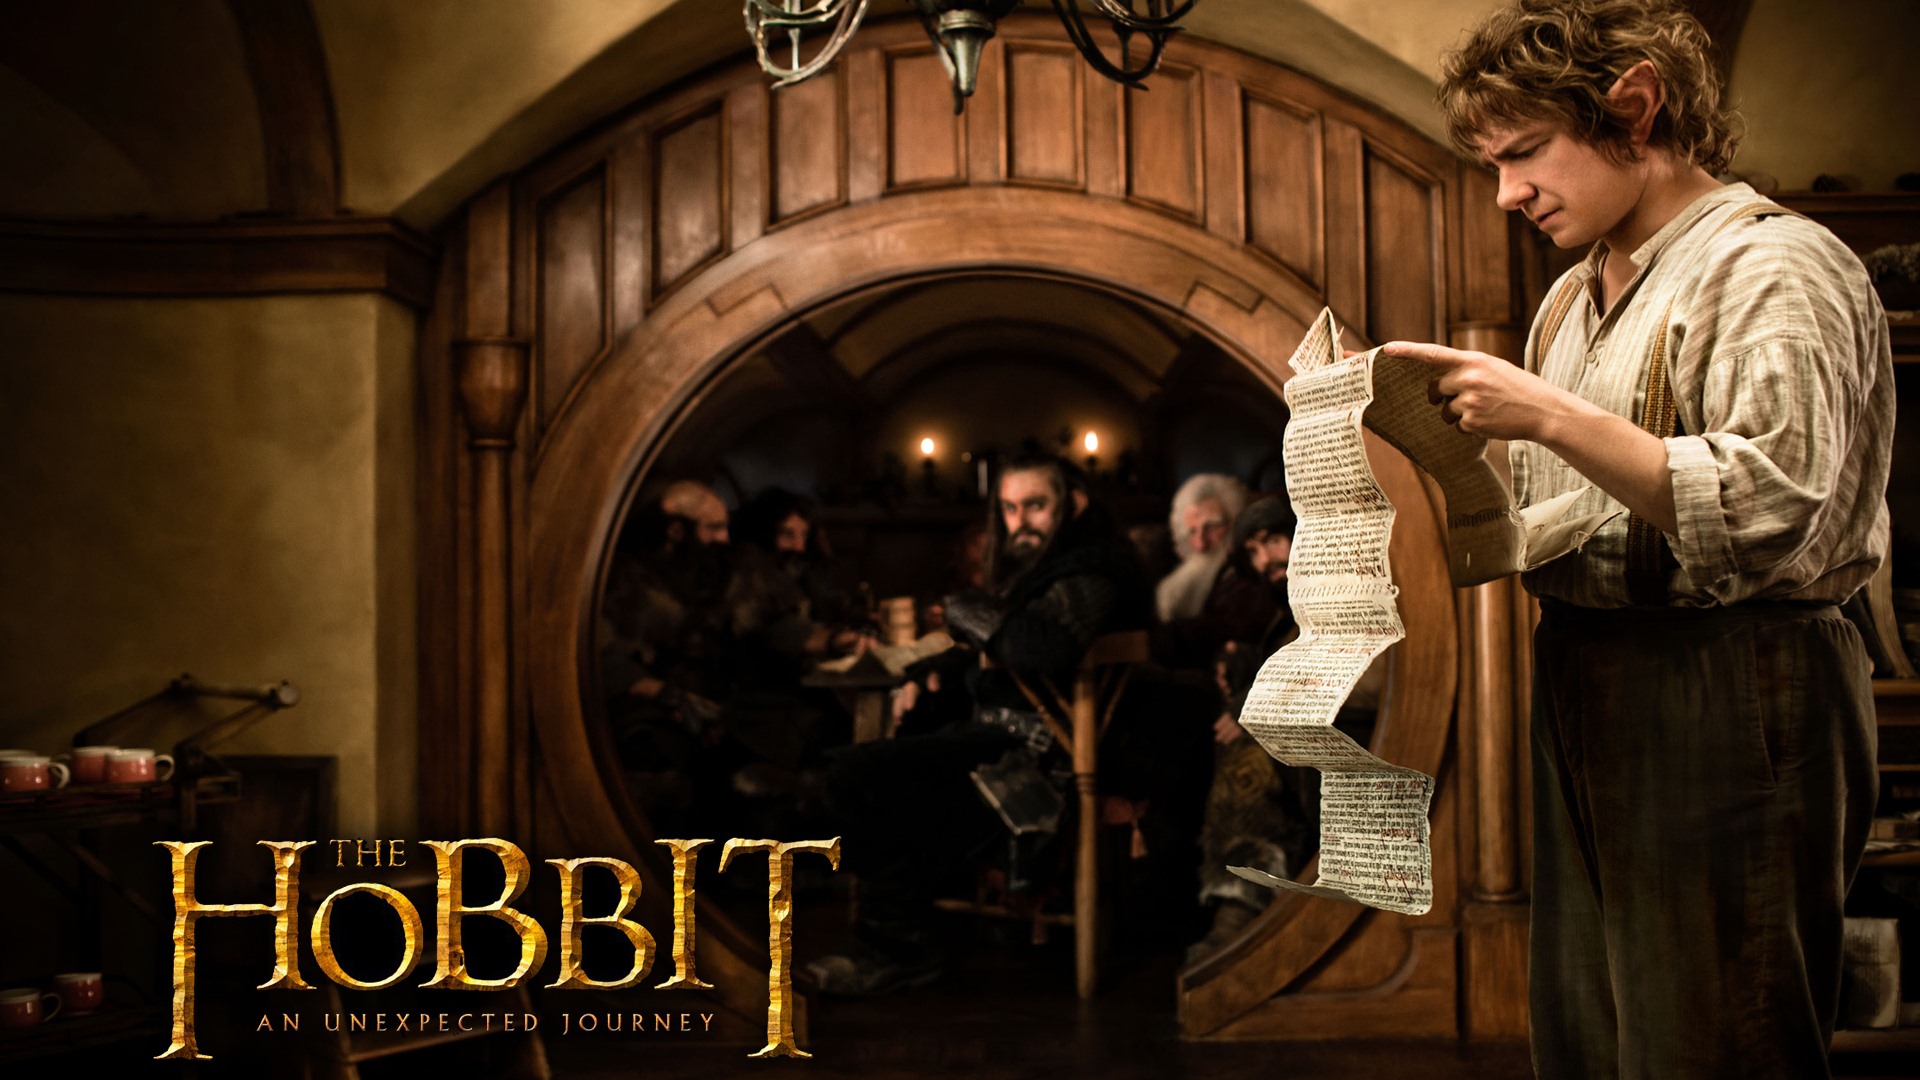 The Hobbit: An Unexpected Journey HD wallpapers #12 - 1920x1080